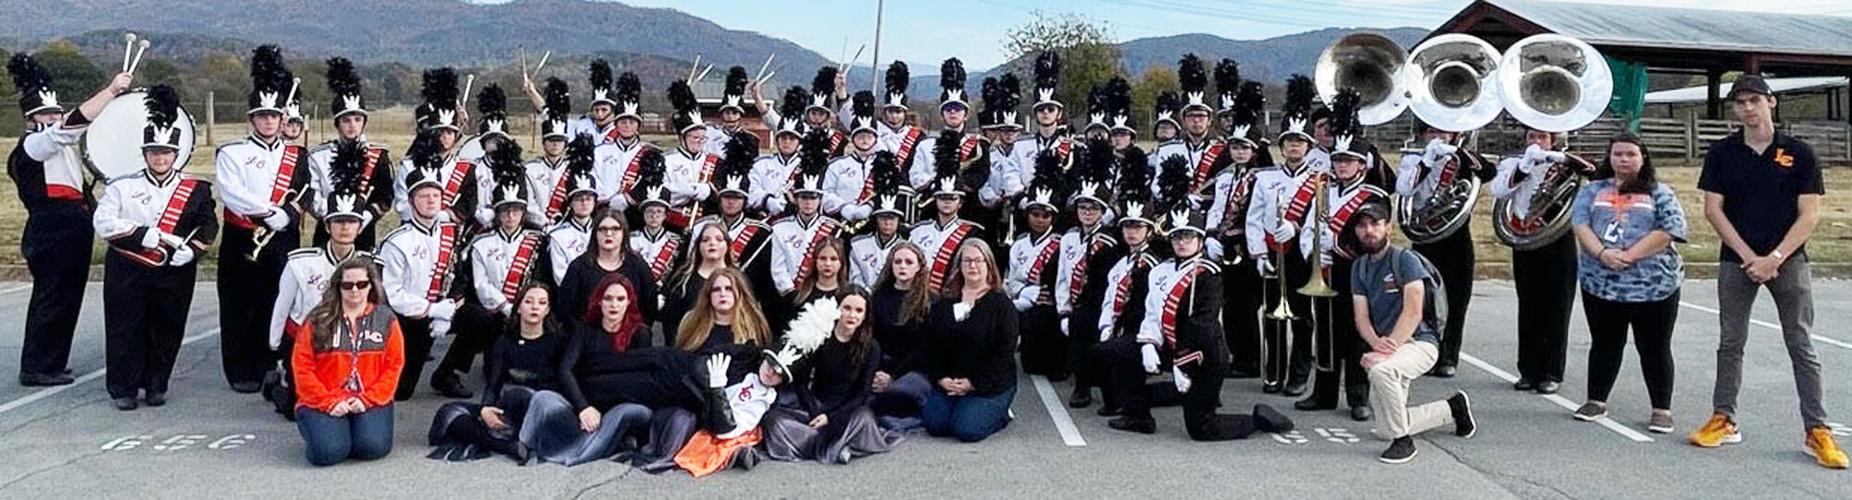 County bands wrap up marching season